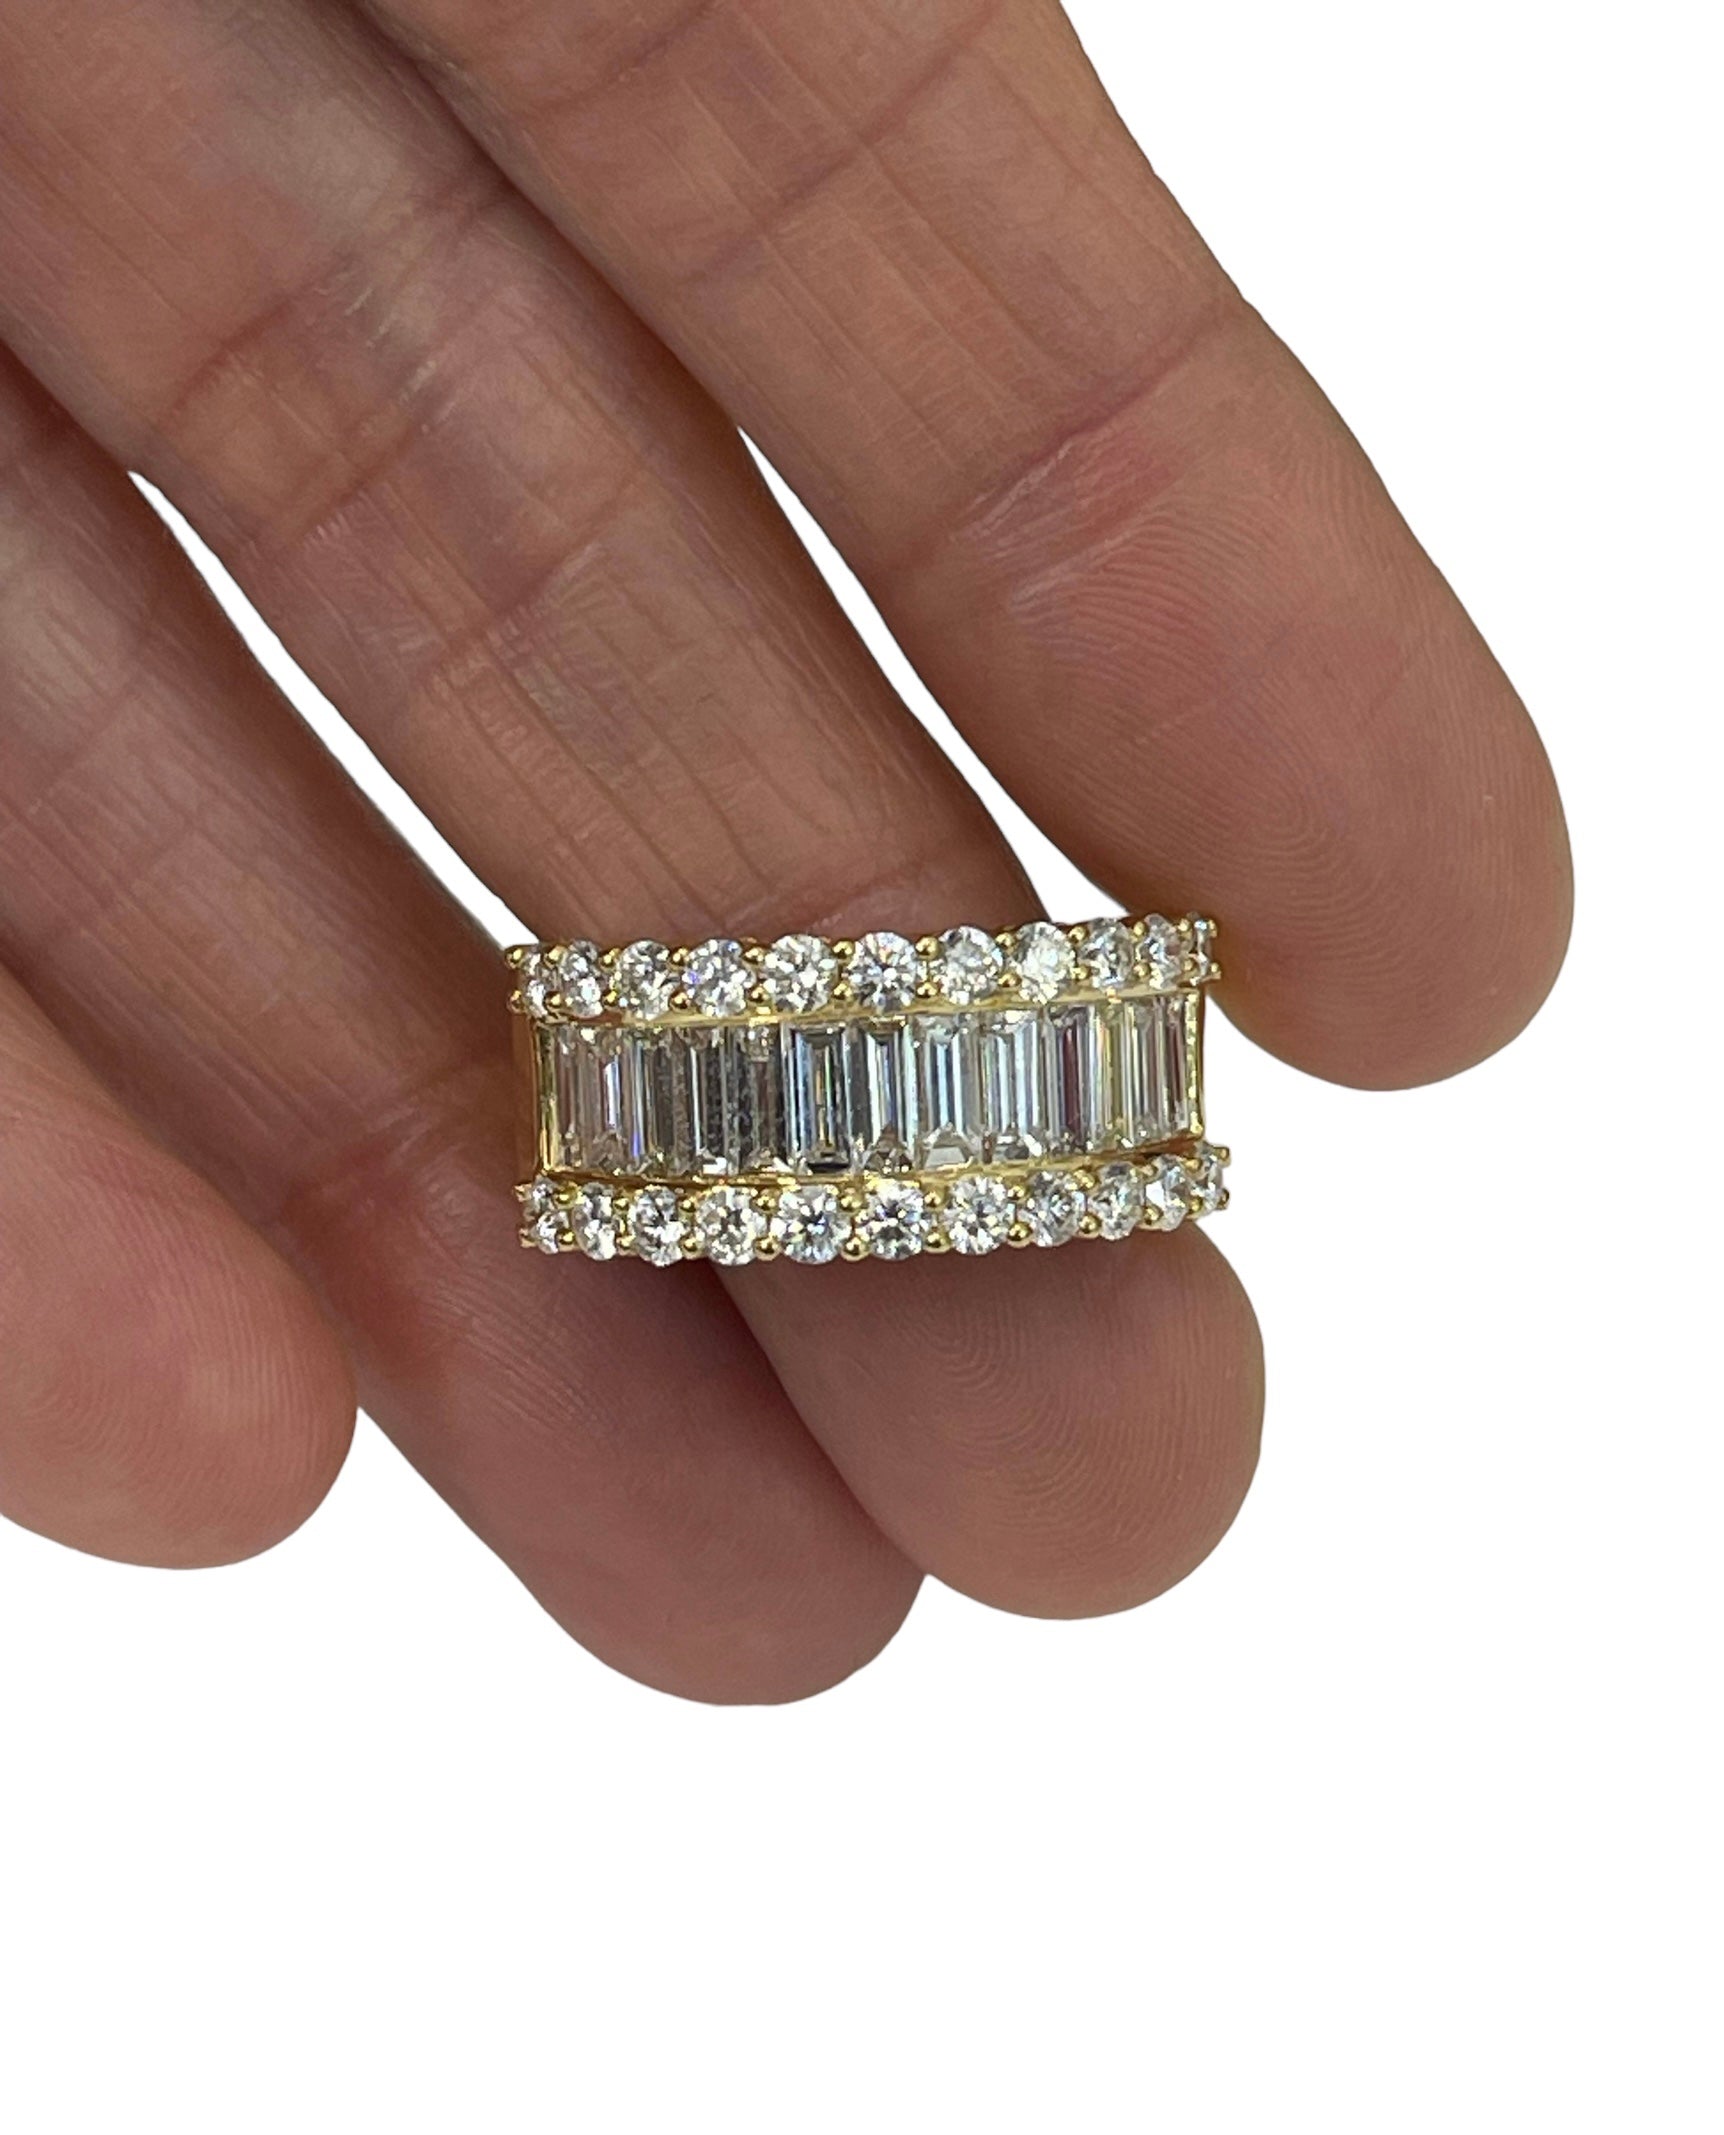 Baguettes and Round Brilliant Wide Diamond Band Yellow Gold 18kt